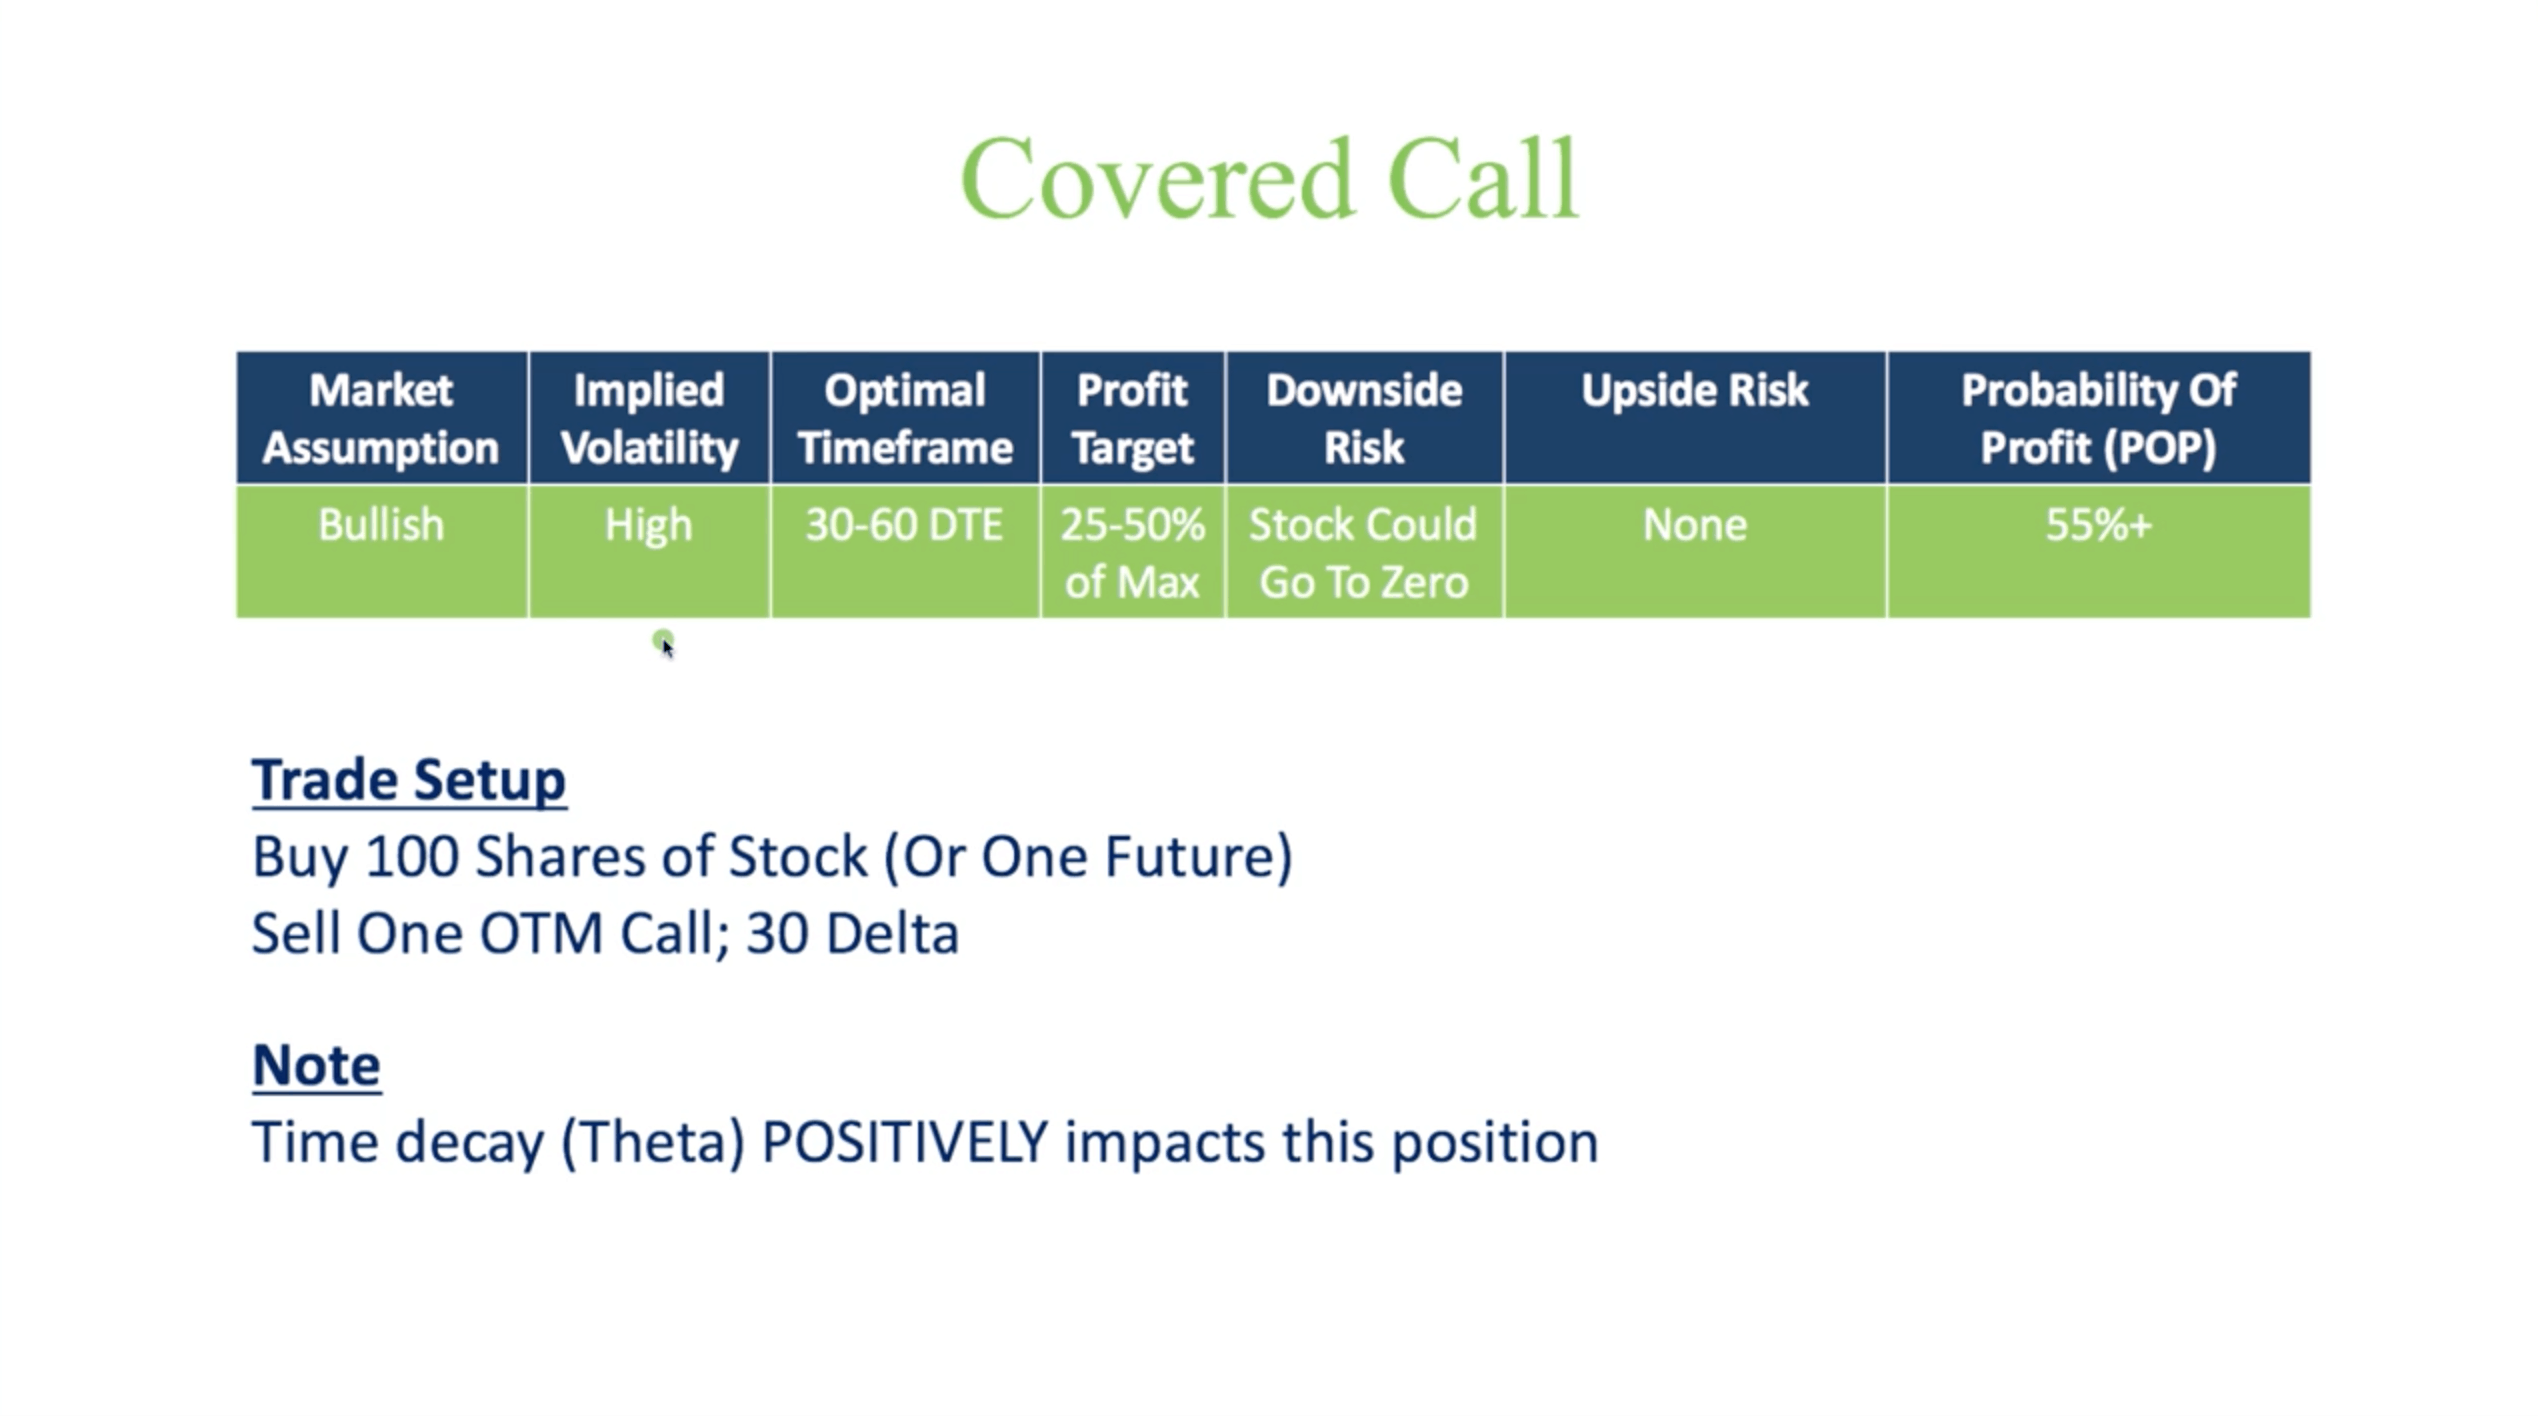 Covered Call Overview Image